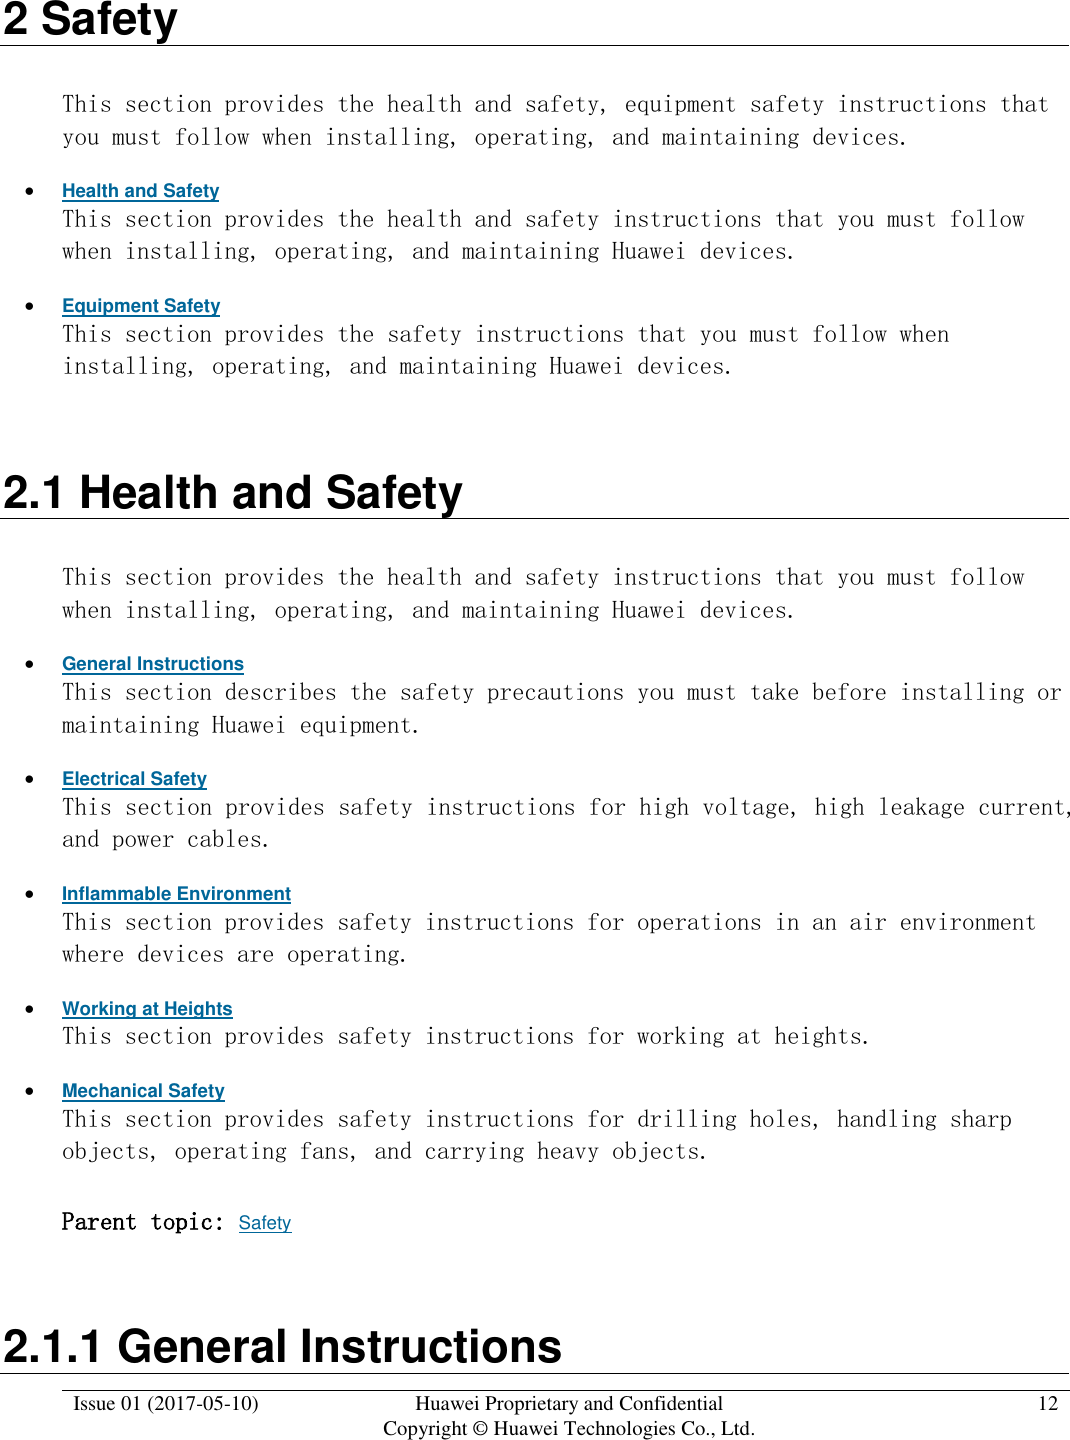  Issue 01 (2017-05-10) Huawei Proprietary and Confidential      Copyright © Huawei Technologies Co., Ltd. 12  2 Safety This section provides the health and safety, equipment safety instructions that you must follow when installing, operating, and maintaining devices.  Health and Safety This section provides the health and safety instructions that you must follow when installing, operating, and maintaining Huawei devices.  Equipment Safety This section provides the safety instructions that you must follow when installing, operating, and maintaining Huawei devices. 2.1 Health and Safety This section provides the health and safety instructions that you must follow when installing, operating, and maintaining Huawei devices.  General Instructions This section describes the safety precautions you must take before installing or maintaining Huawei equipment.  Electrical Safety This section provides safety instructions for high voltage, high leakage current, and power cables.   Inflammable Environment This section provides safety instructions for operations in an air environment where devices are operating.  Working at Heights This section provides safety instructions for working at heights.  Mechanical Safety This section provides safety instructions for drilling holes, handling sharp objects, operating fans, and carrying heavy objects. Parent topic: Safety 2.1.1 General Instructions 